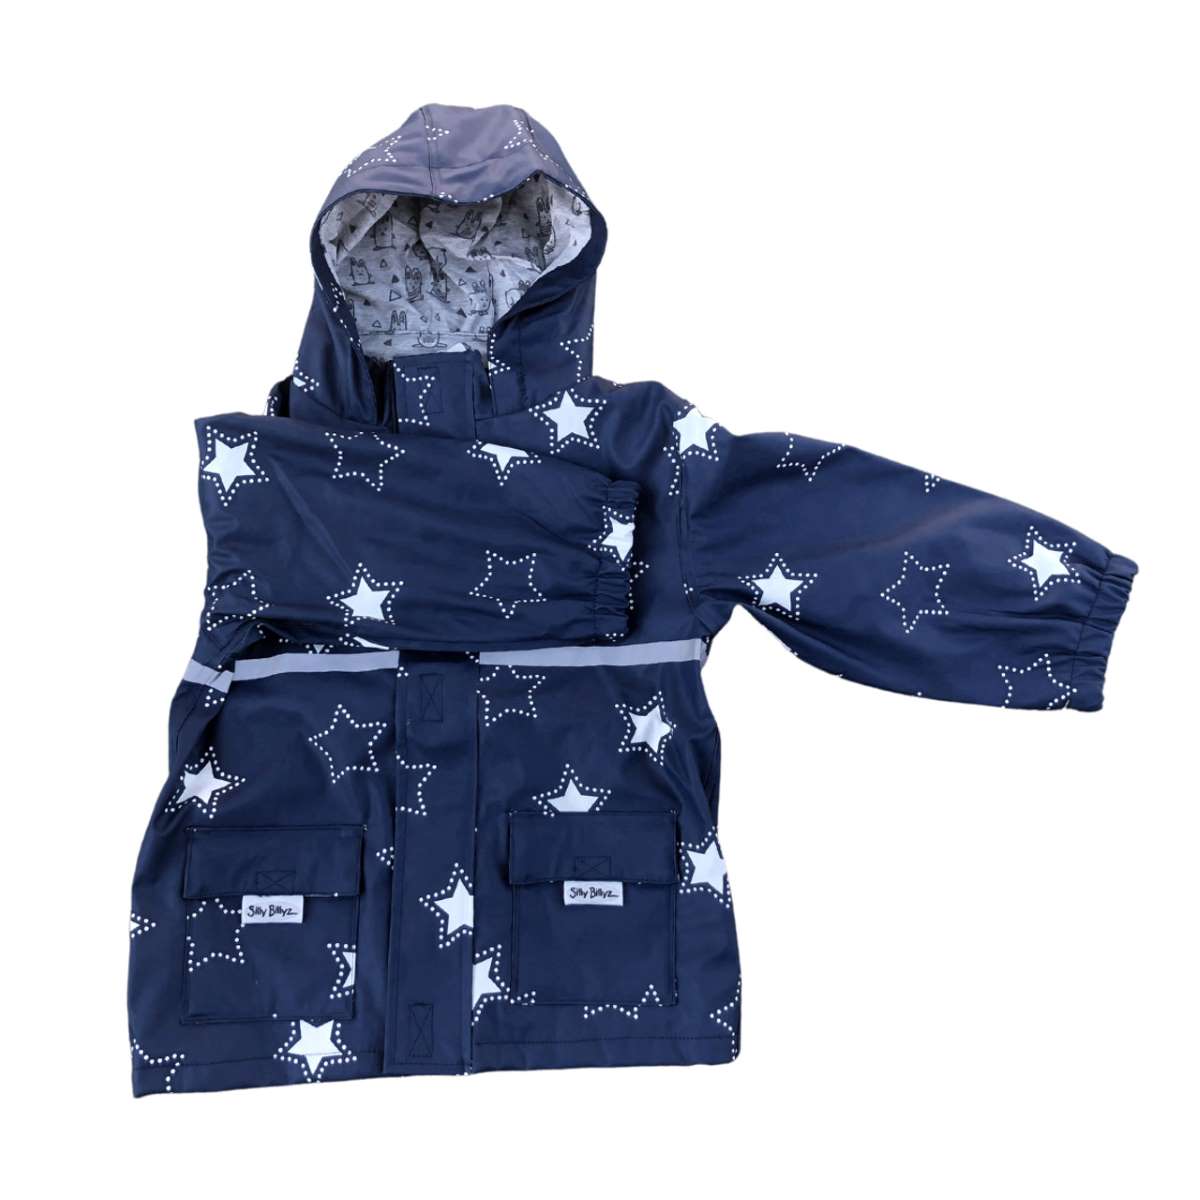 Stylish windproof and waterproof hooded jacket by Silly Billyz. Made from high quality PU which is both durable and beautifully soft and with their signature Rabbit Print polycotton lining for added comfort.